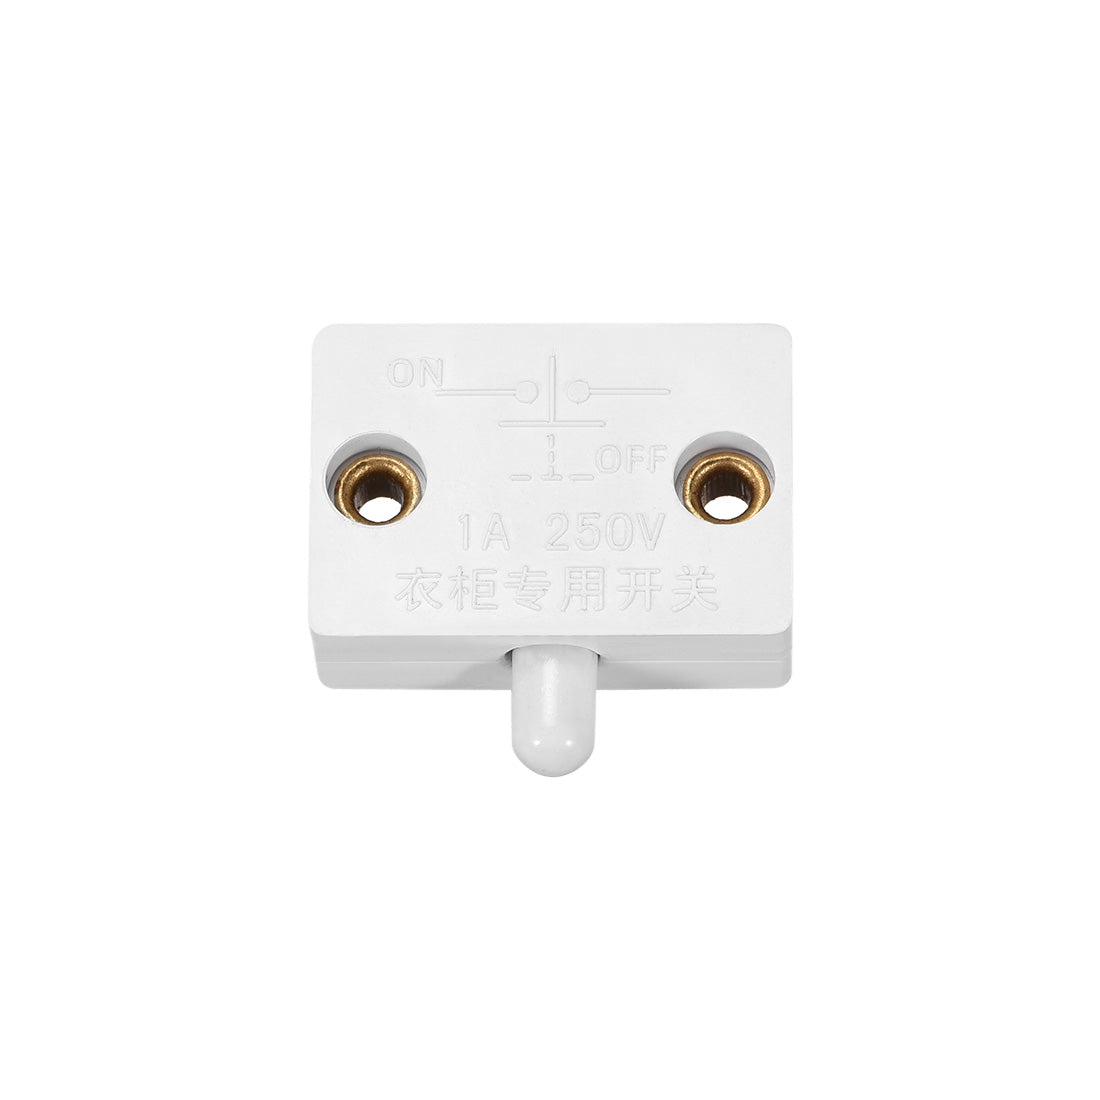 uxcell Uxcell Wardrobe Door Light Switch Momentary Cabinet Closet Switch Normally Closed 110-250V 1A White